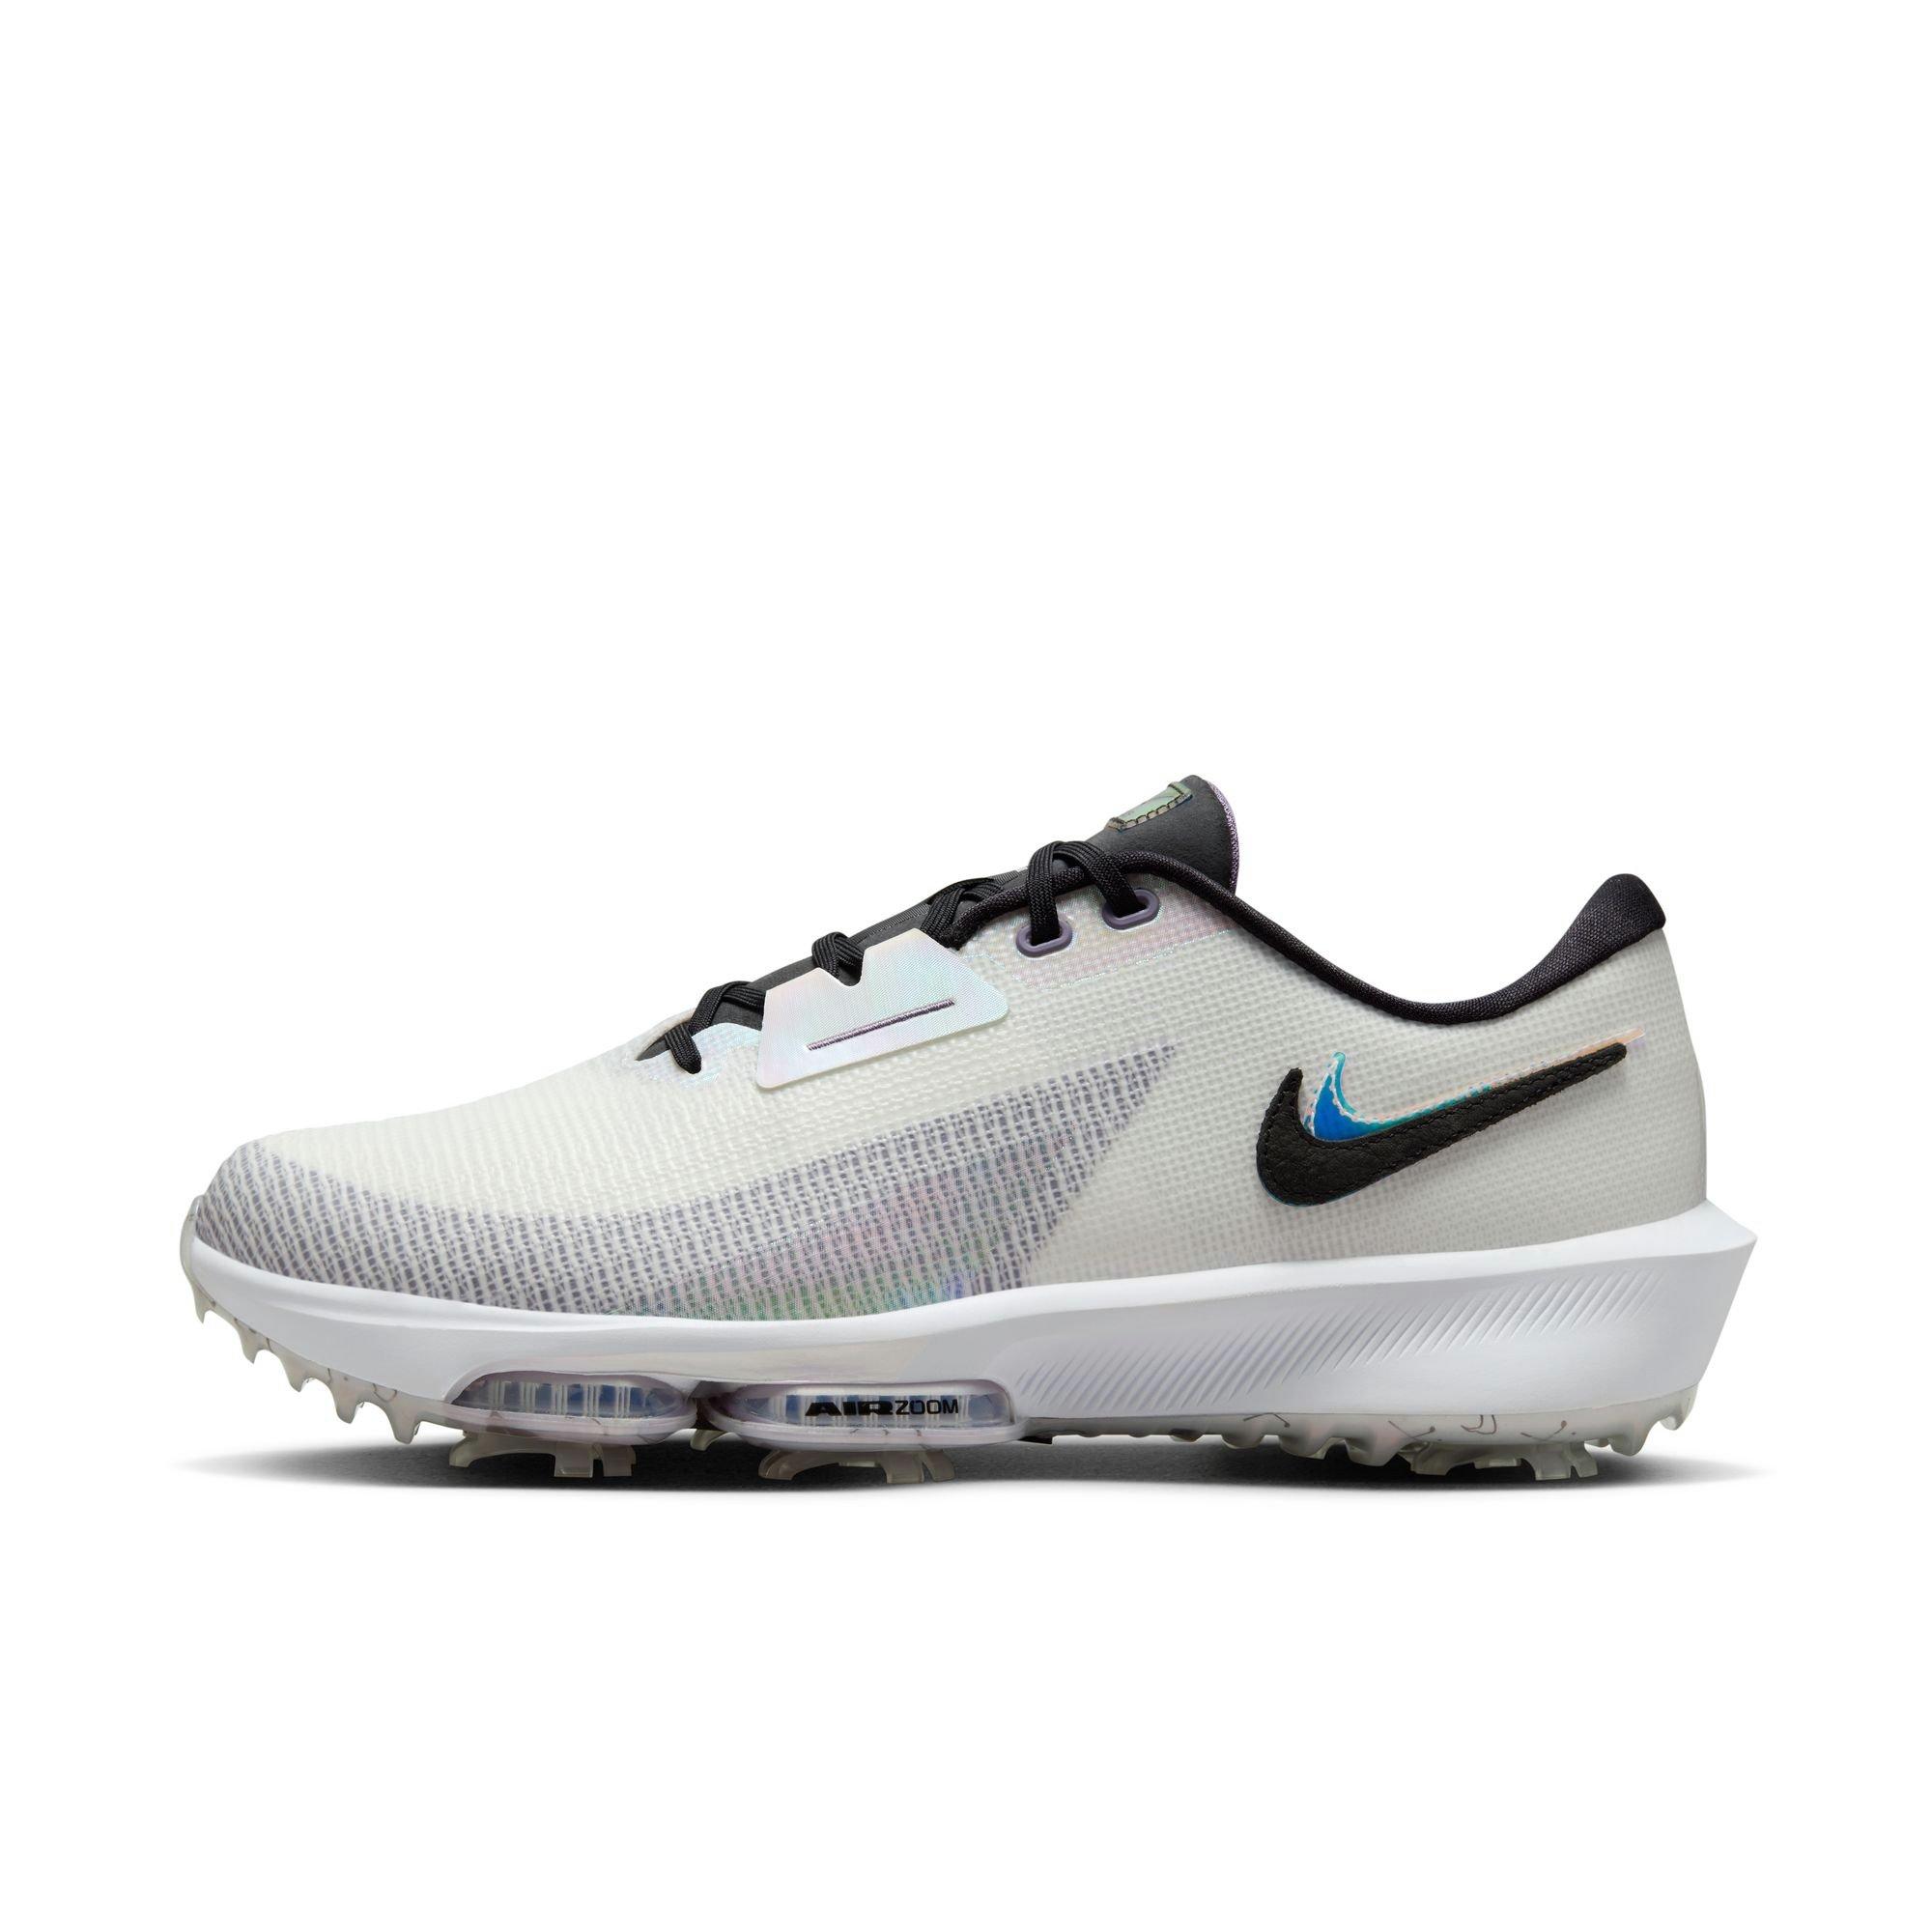 NIKE Air Zoom Infinity Tour NXT NRG Spikeless Golf Shoe - White 